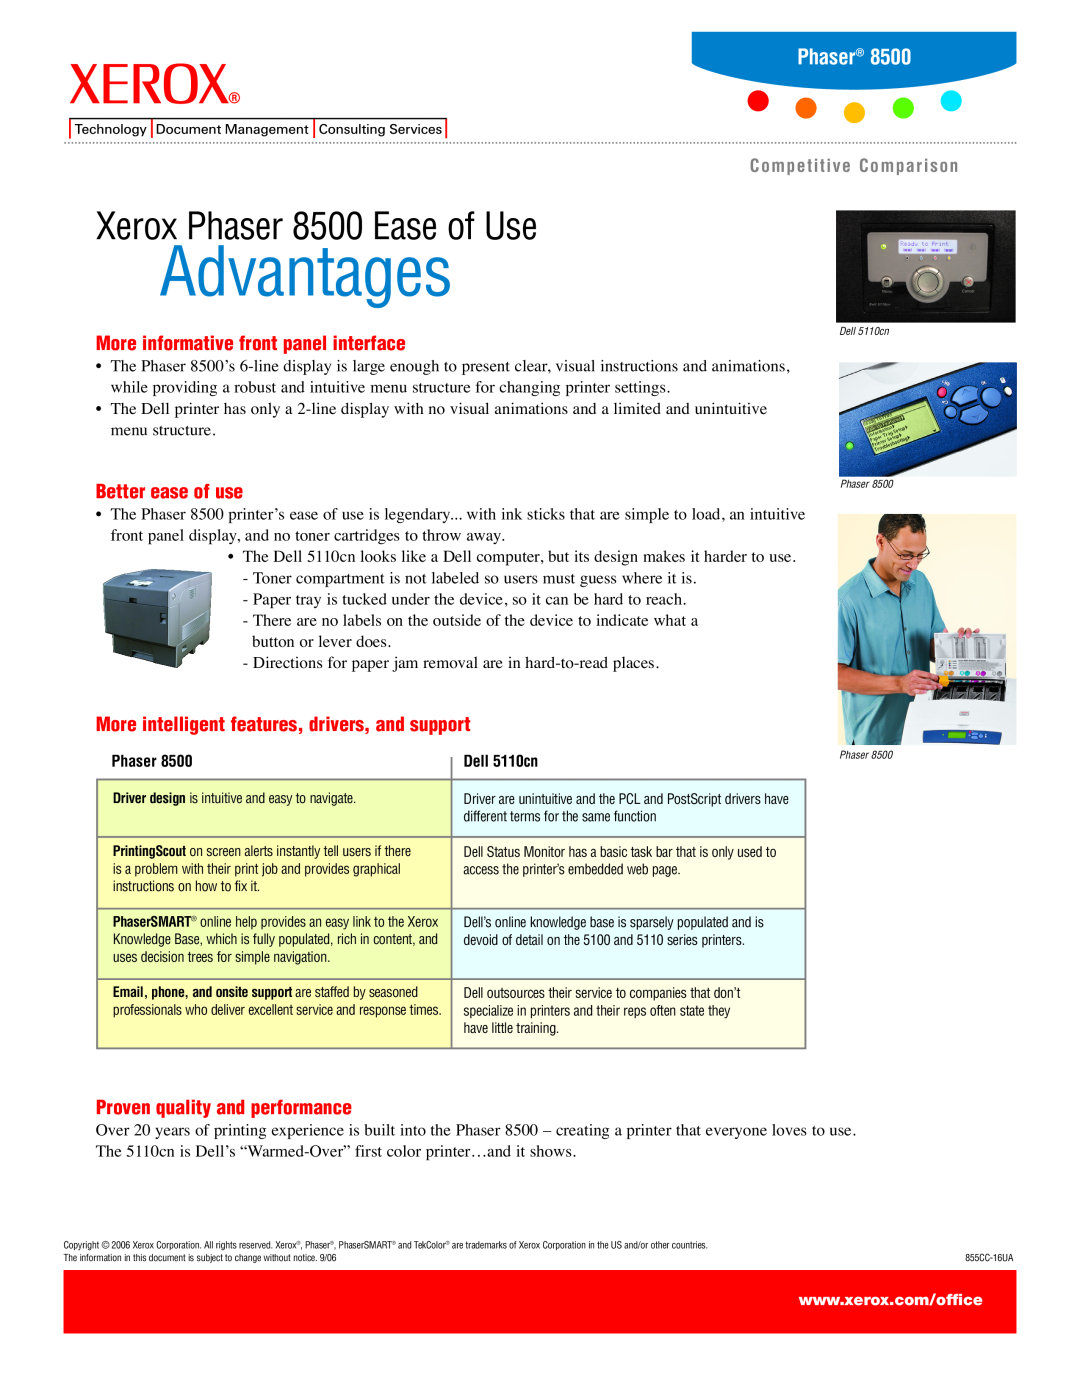 Xerox manual Xerox Phaser 8500 Ease of Use, Advantages, More informative front panel interface, Better ease of use 